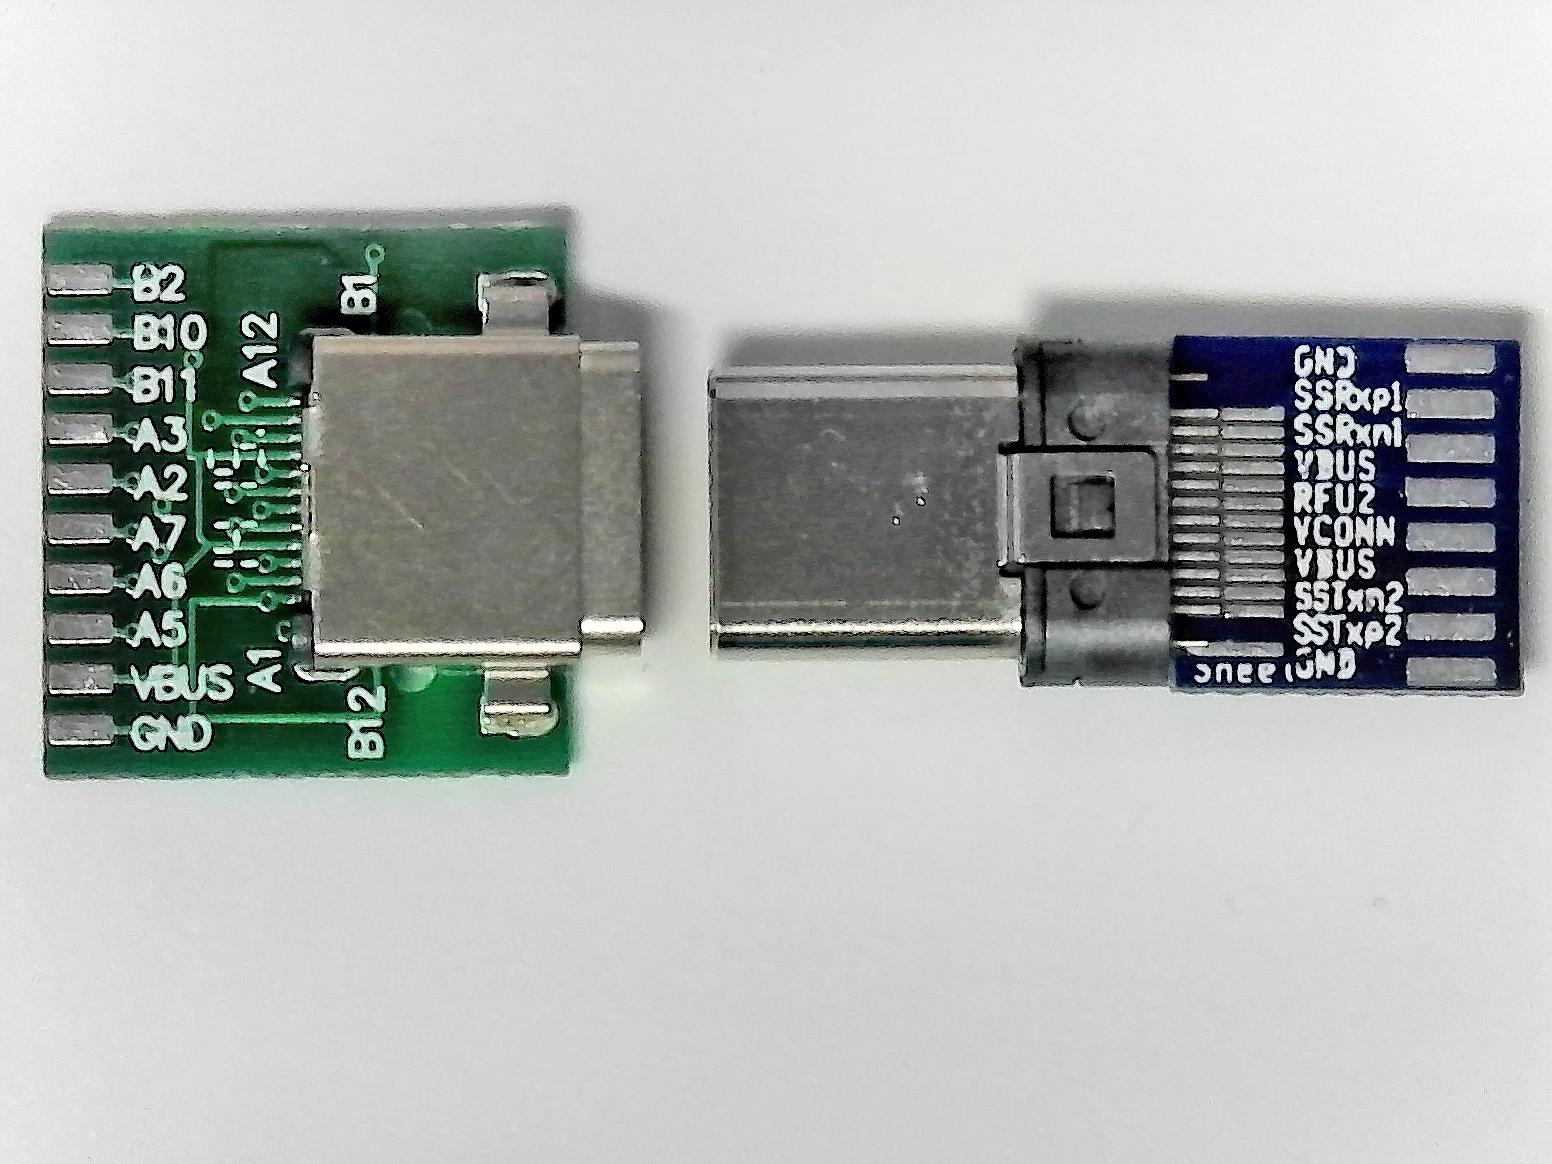 Comparison of the connectors and chips for USB Type-A and Type-C